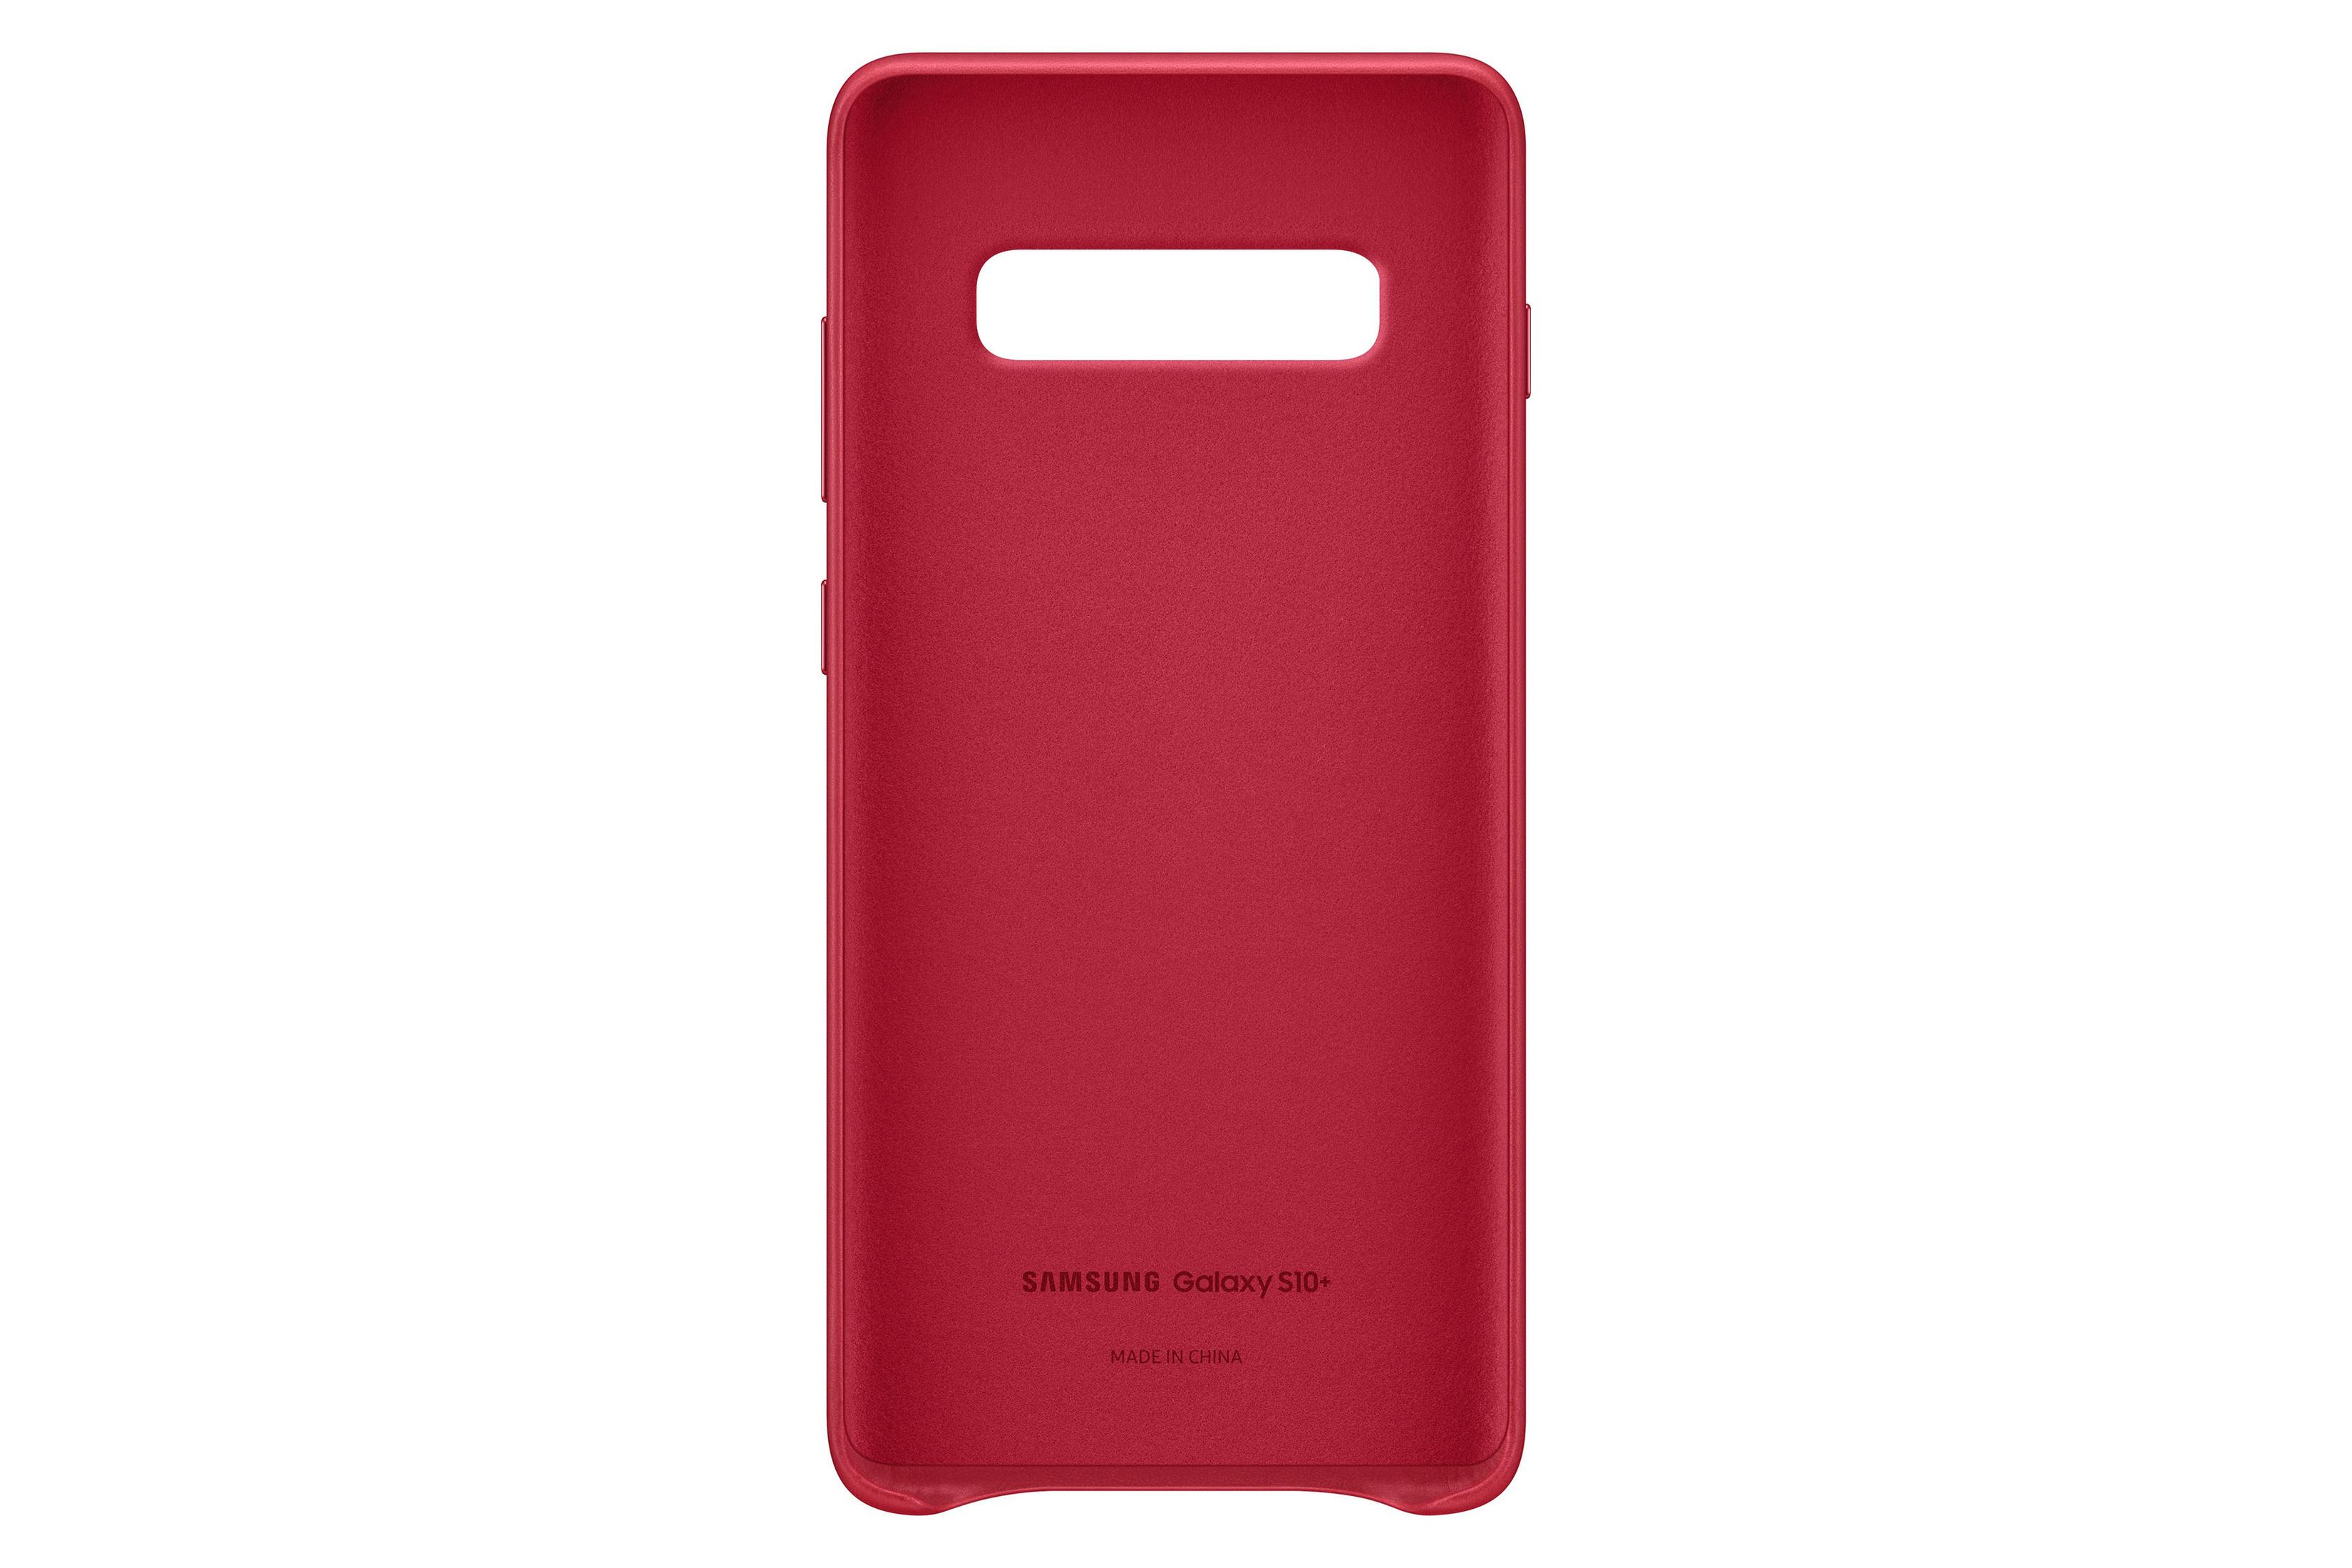 SAMSUNG COVER S10+ Rot S10+, LEATHER RED, Galaxy Samsung, EF-VG975LREGWW Backcover,